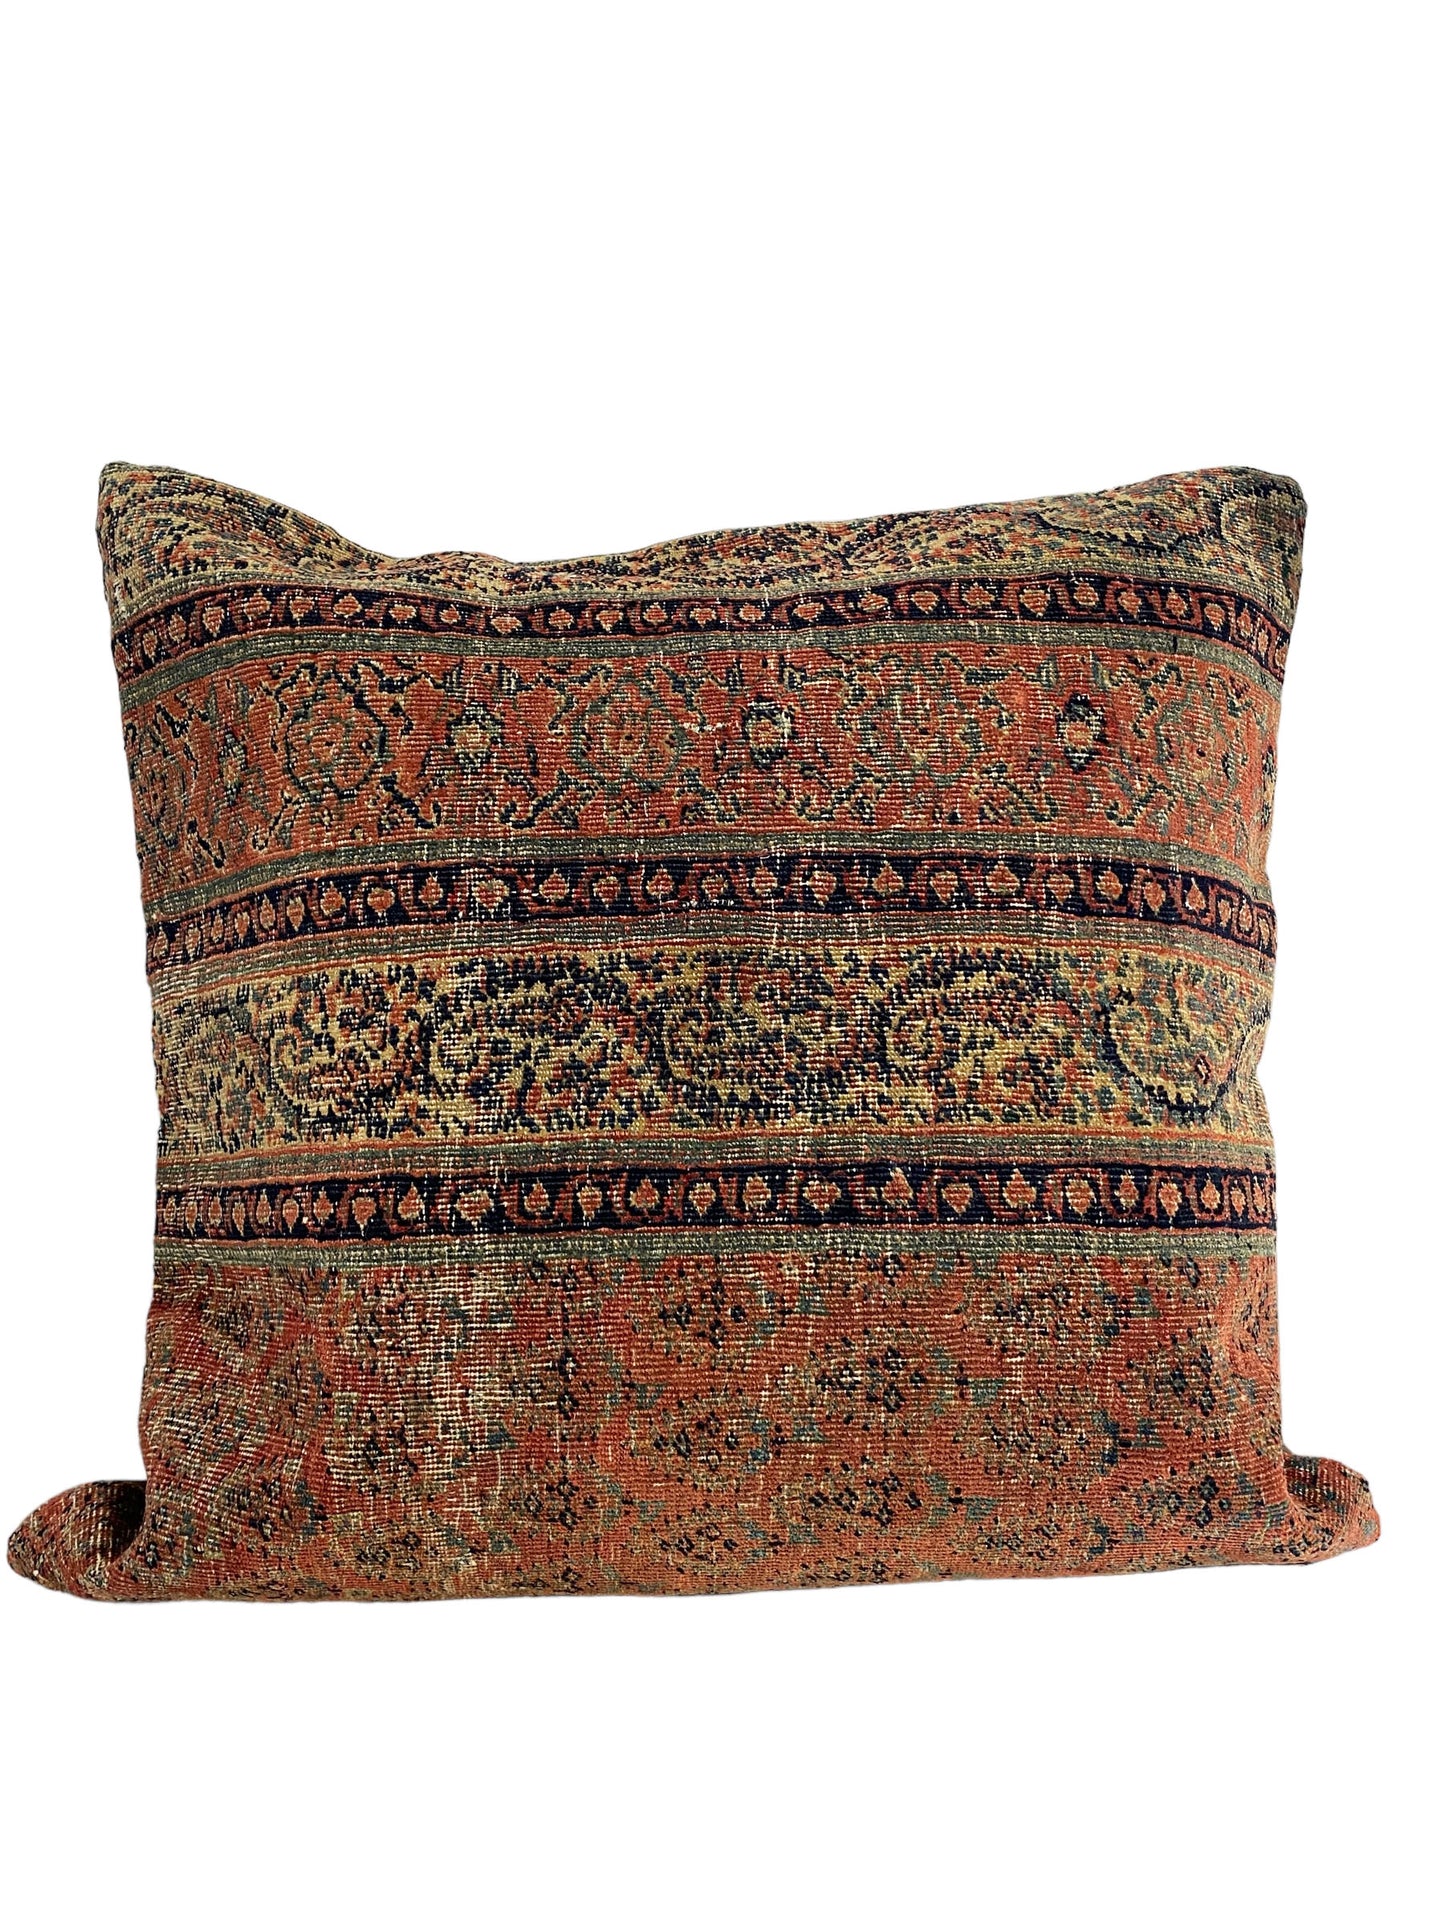 #5686 Superb 19th Fragment Herat Paisley Design  Pillow  Cover 22" by 22"